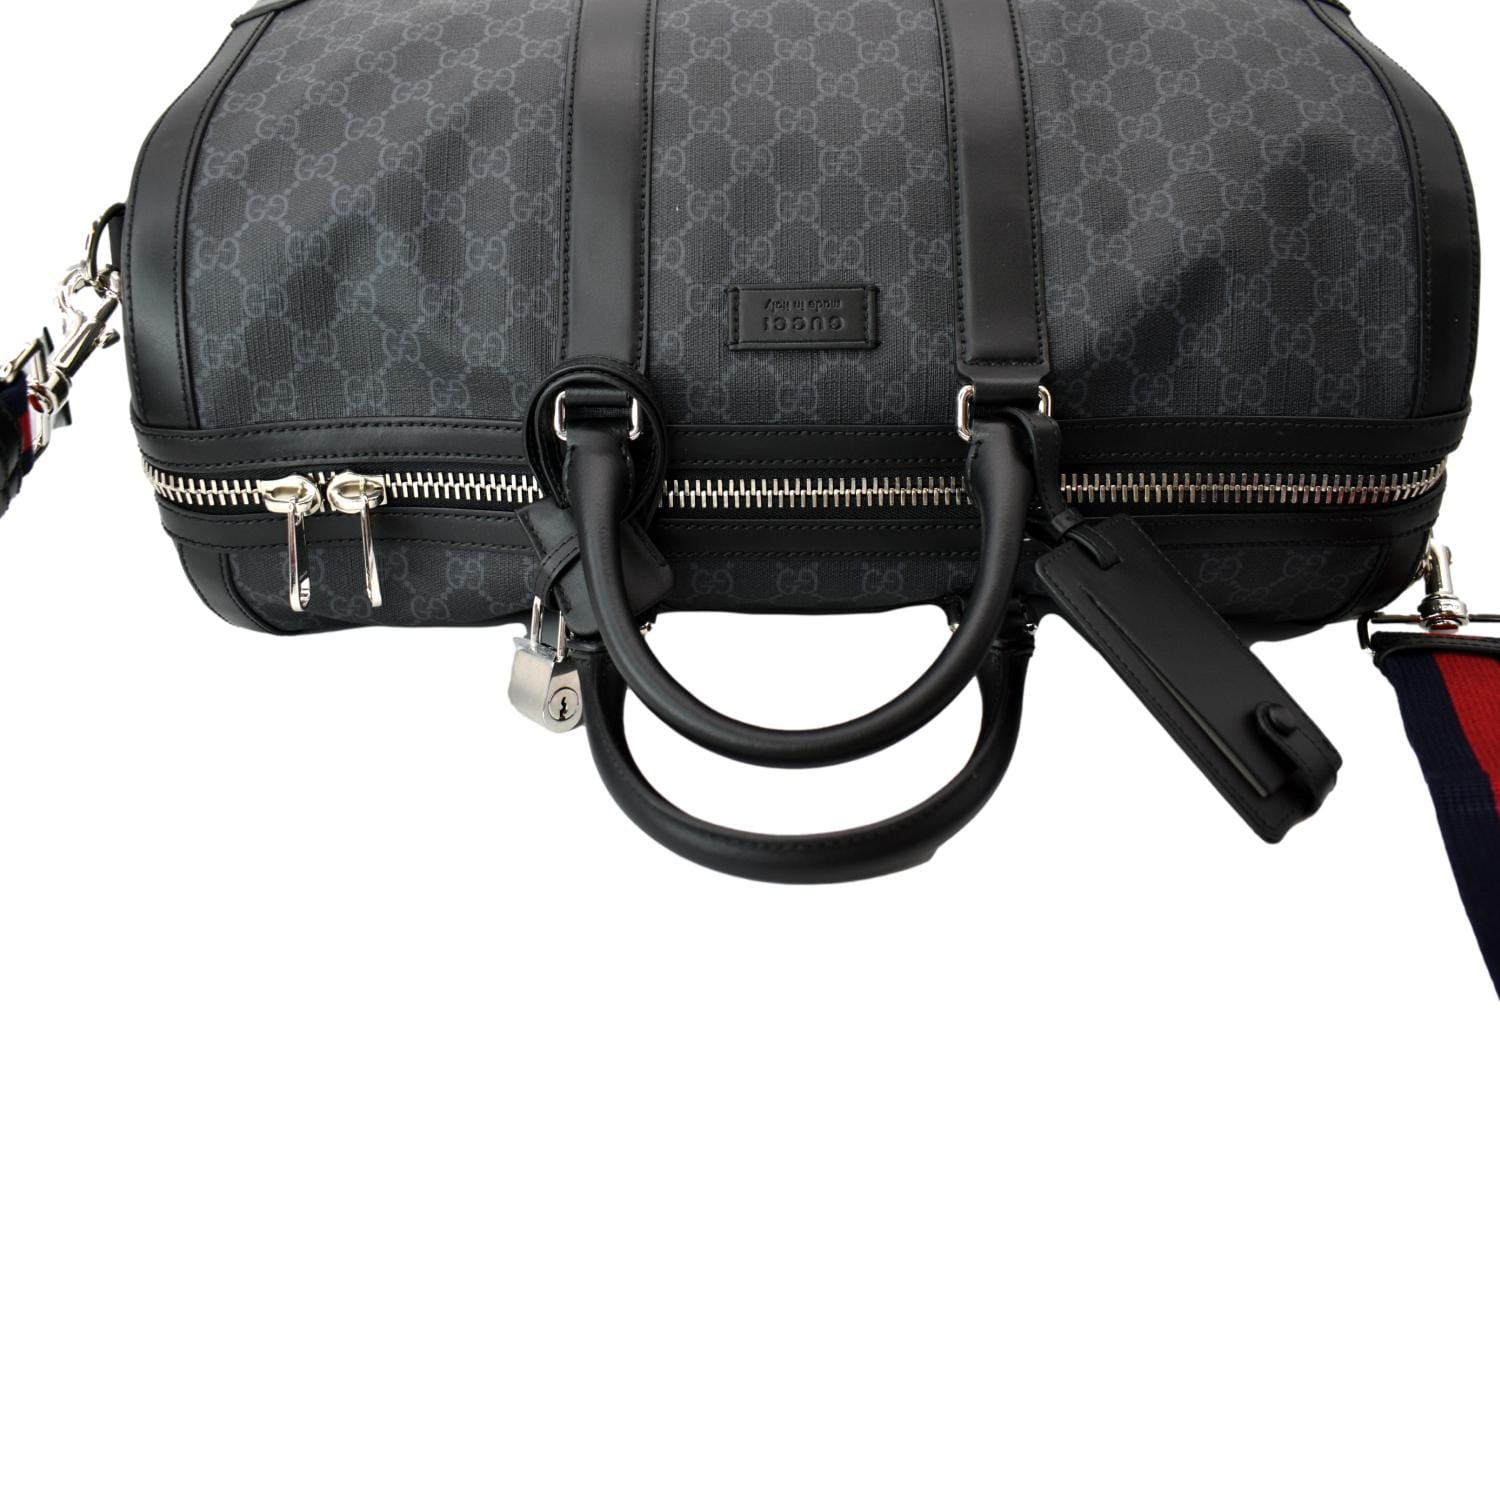 Gucci GG Black Carry-On Duffle